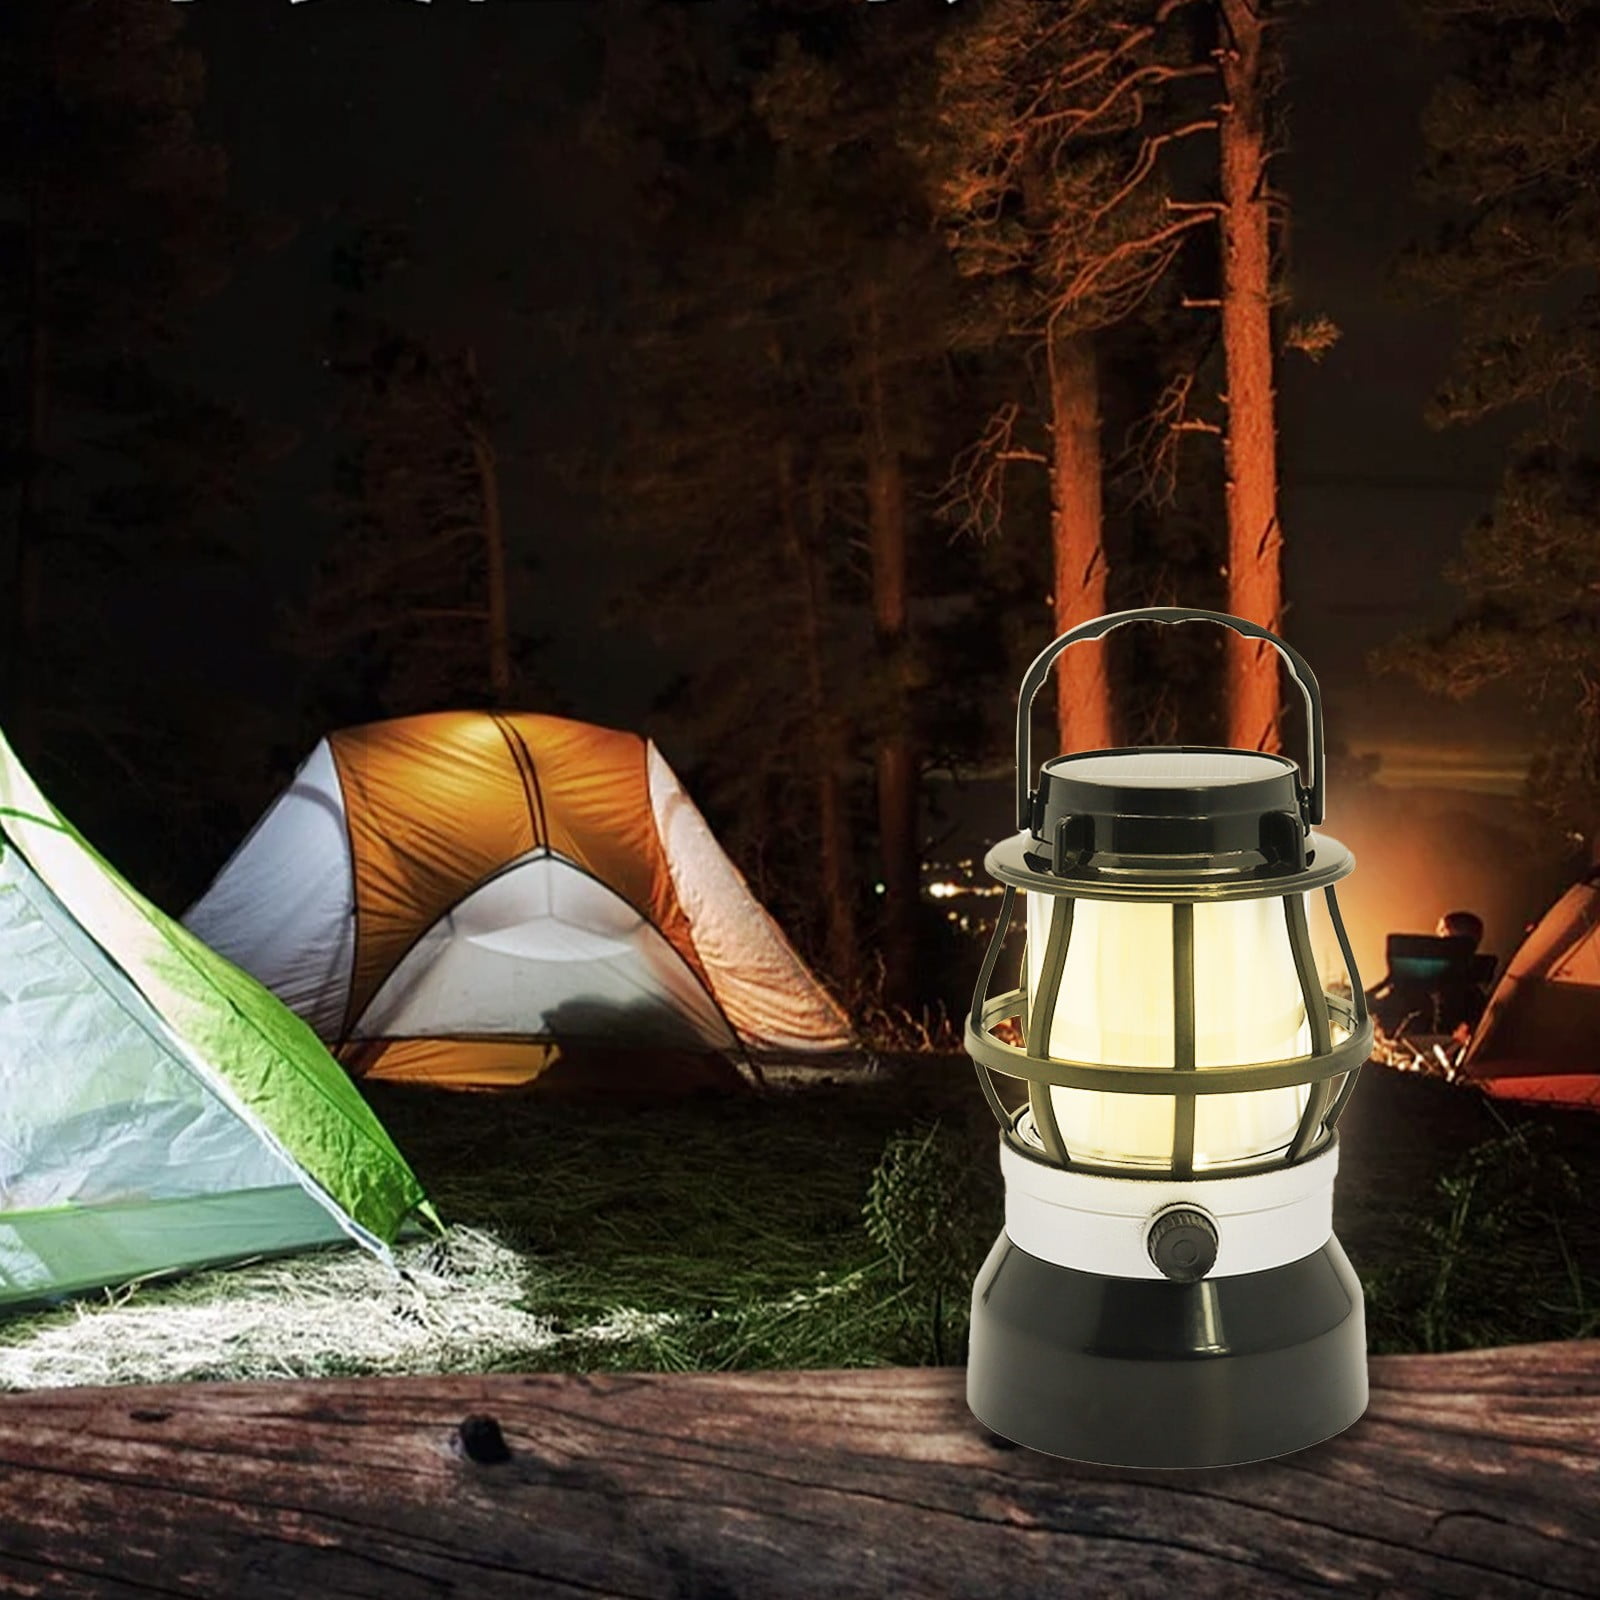 The Best LED Camping Lanterns - MetaEfficient